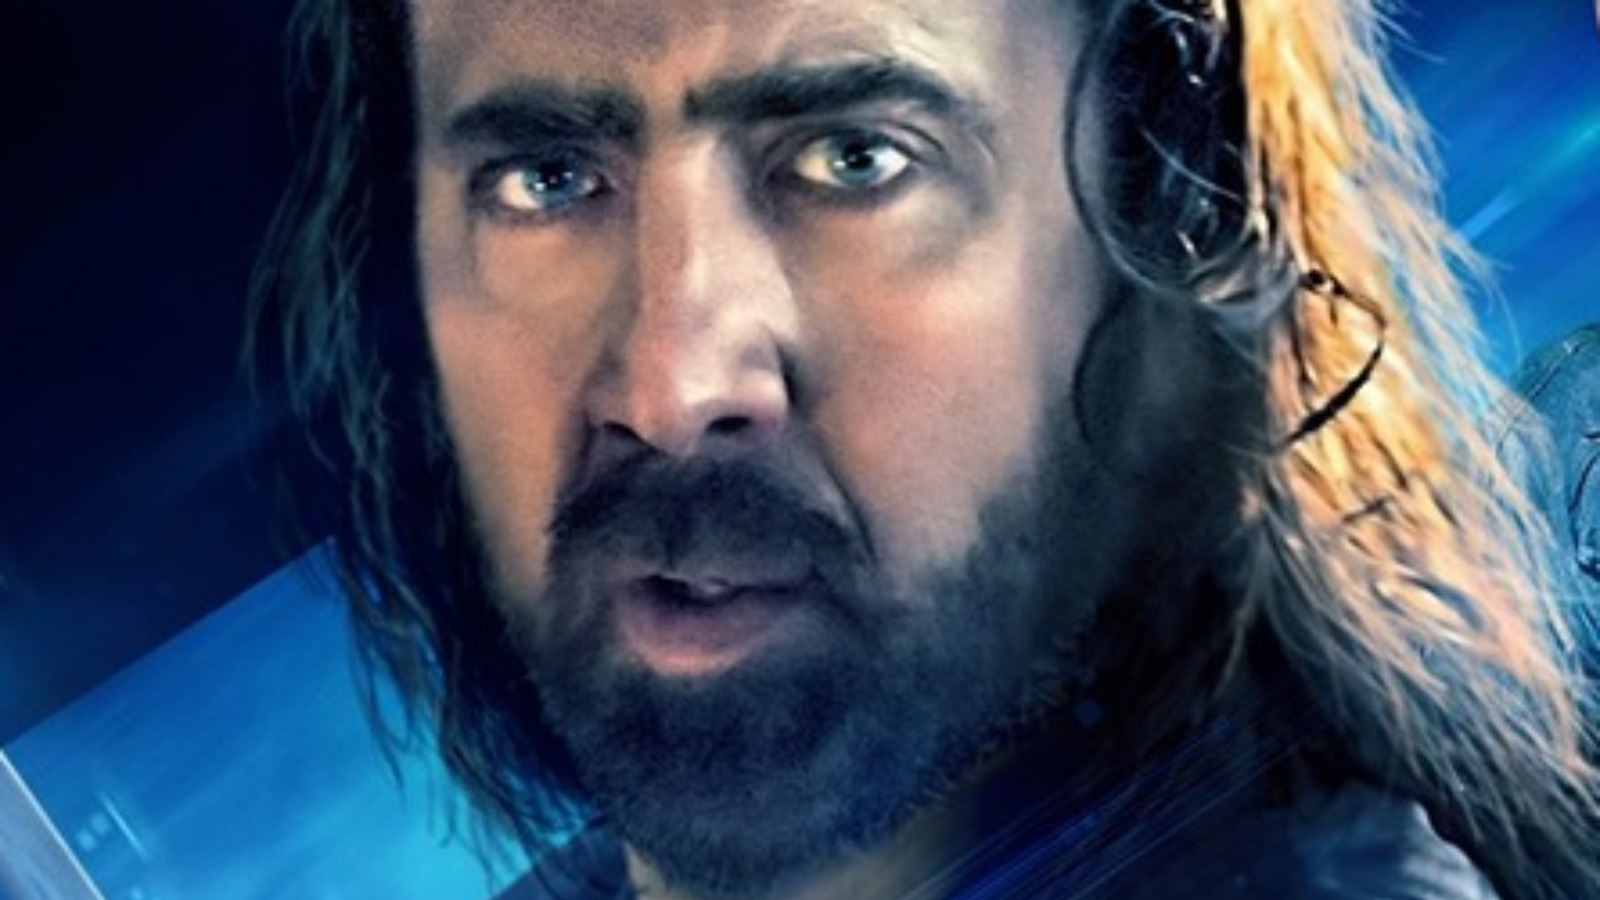 Nicolas Cage S Epic Movie Is Coming To Netflix Soon Best netflix series and shows. epic movie is coming to netflix soon